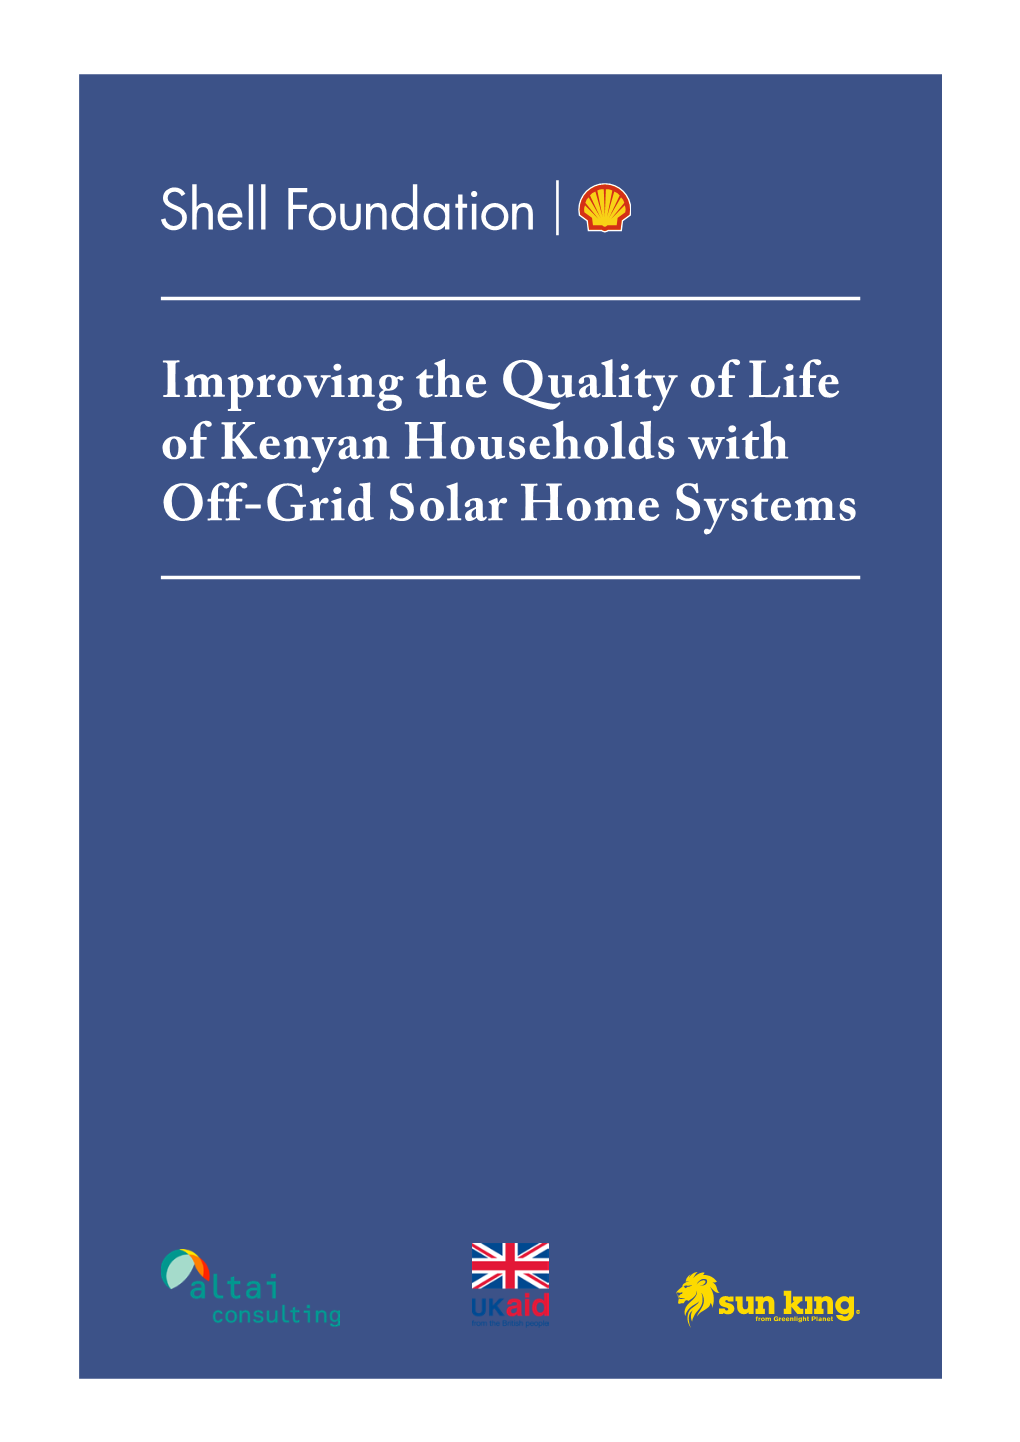 Improving the Quality of Life of Kenyan Households with Off-Grid Solar